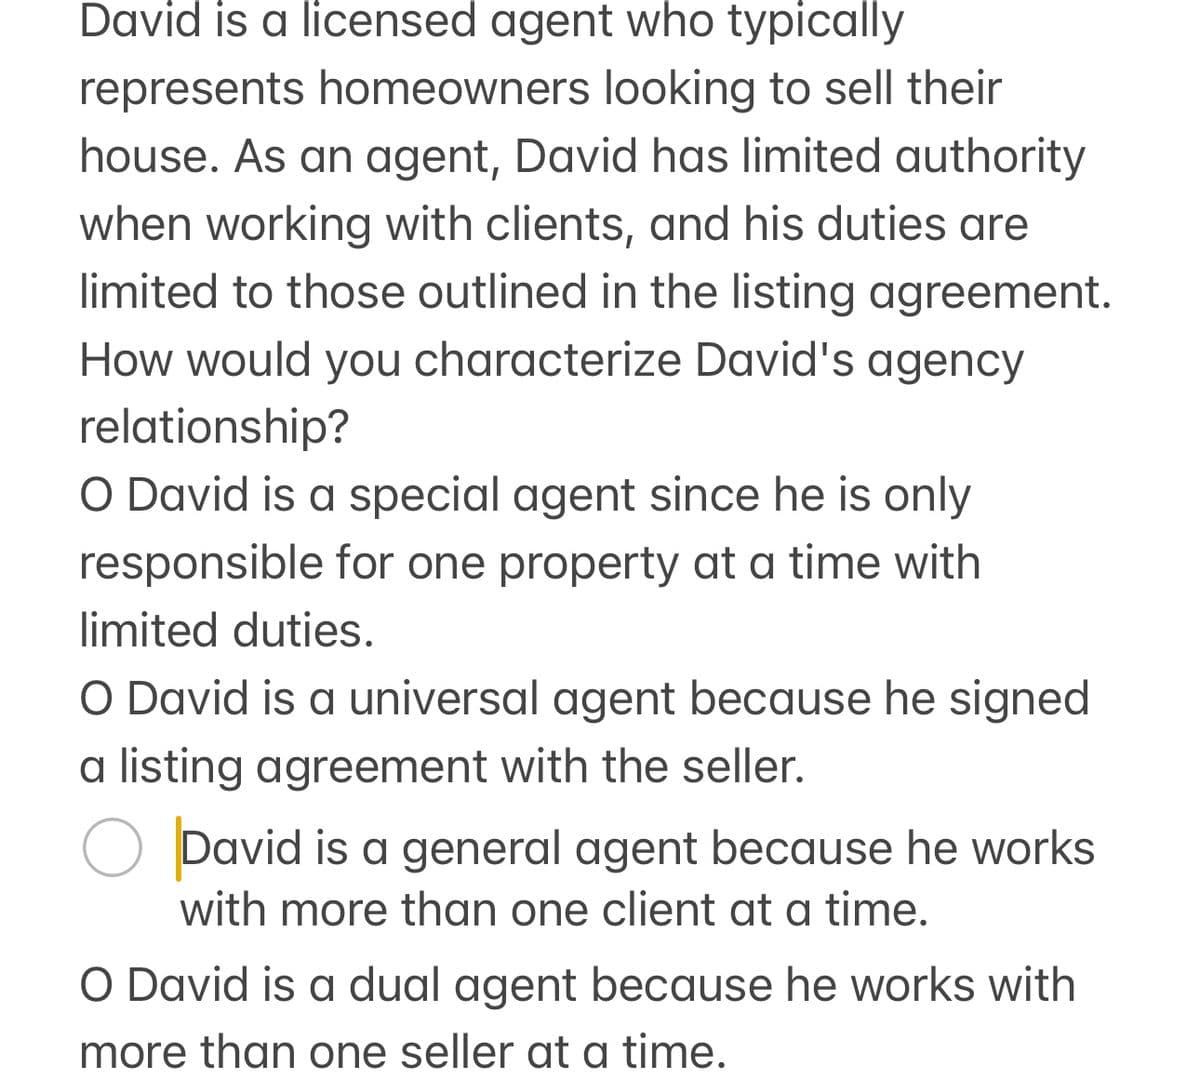 David is a licensed agent who typically
represents homeowners looking to sell their
house. As an agent, David has limited authority
when working with clients, and his duties are
limited to those outlined in the listing agreement.
How would you characterize David's agency
relationship?
O David is a special agent since he is only
responsible for one property at a time with
limited duties.
O David is a universal agent because he signed
a listing agreement with the seller.
О David is a general agent because he works
with more than one client at a time.
O David is a dual agent because he works with
more than one seller at a time.